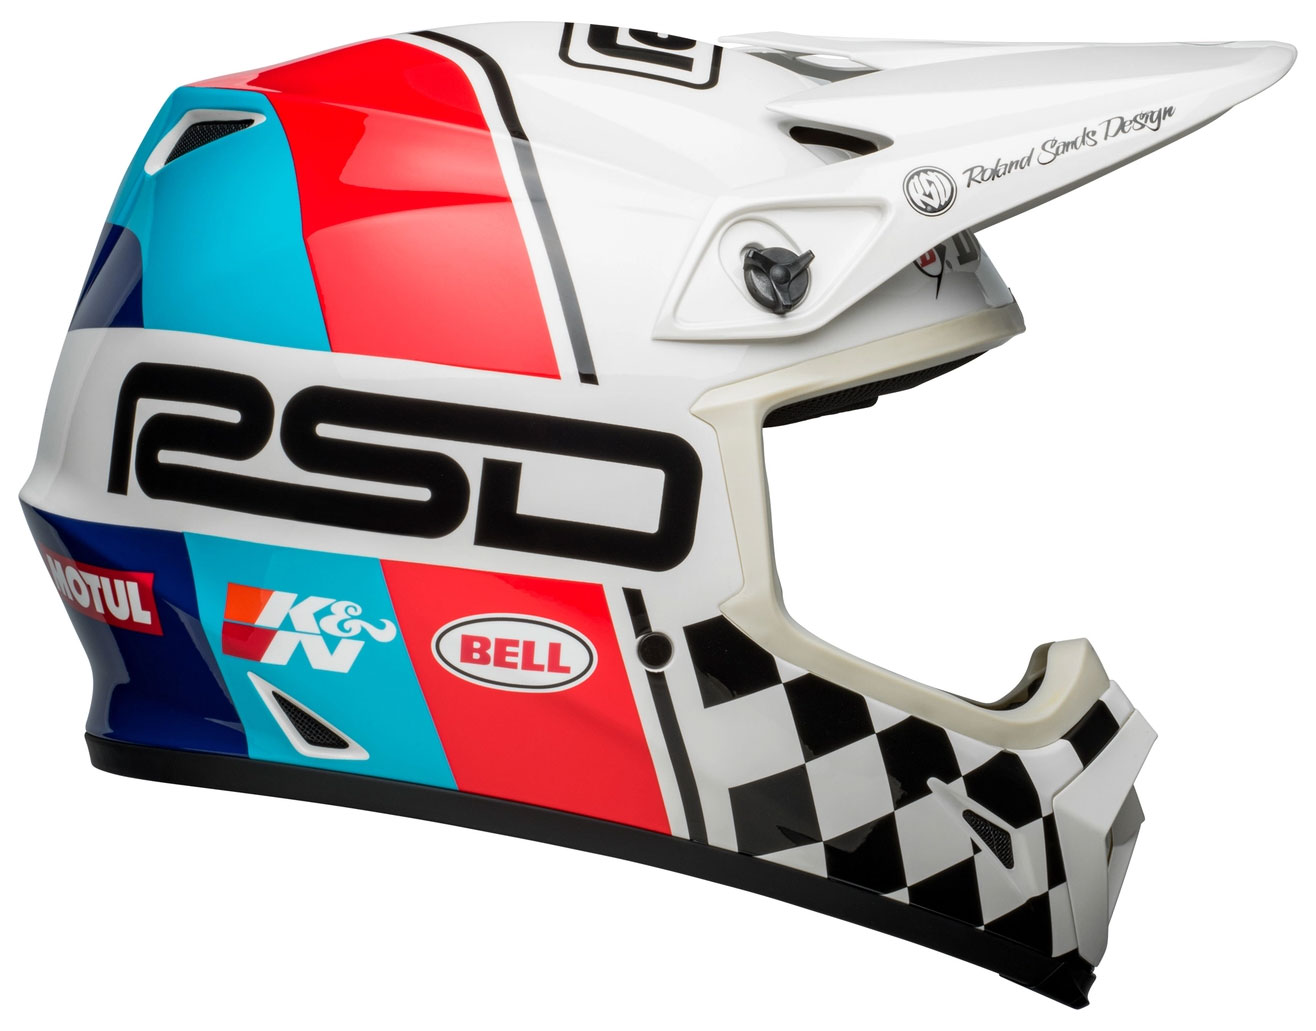 casque bell mx 9 mips rsd the rally gloss white black roland sands